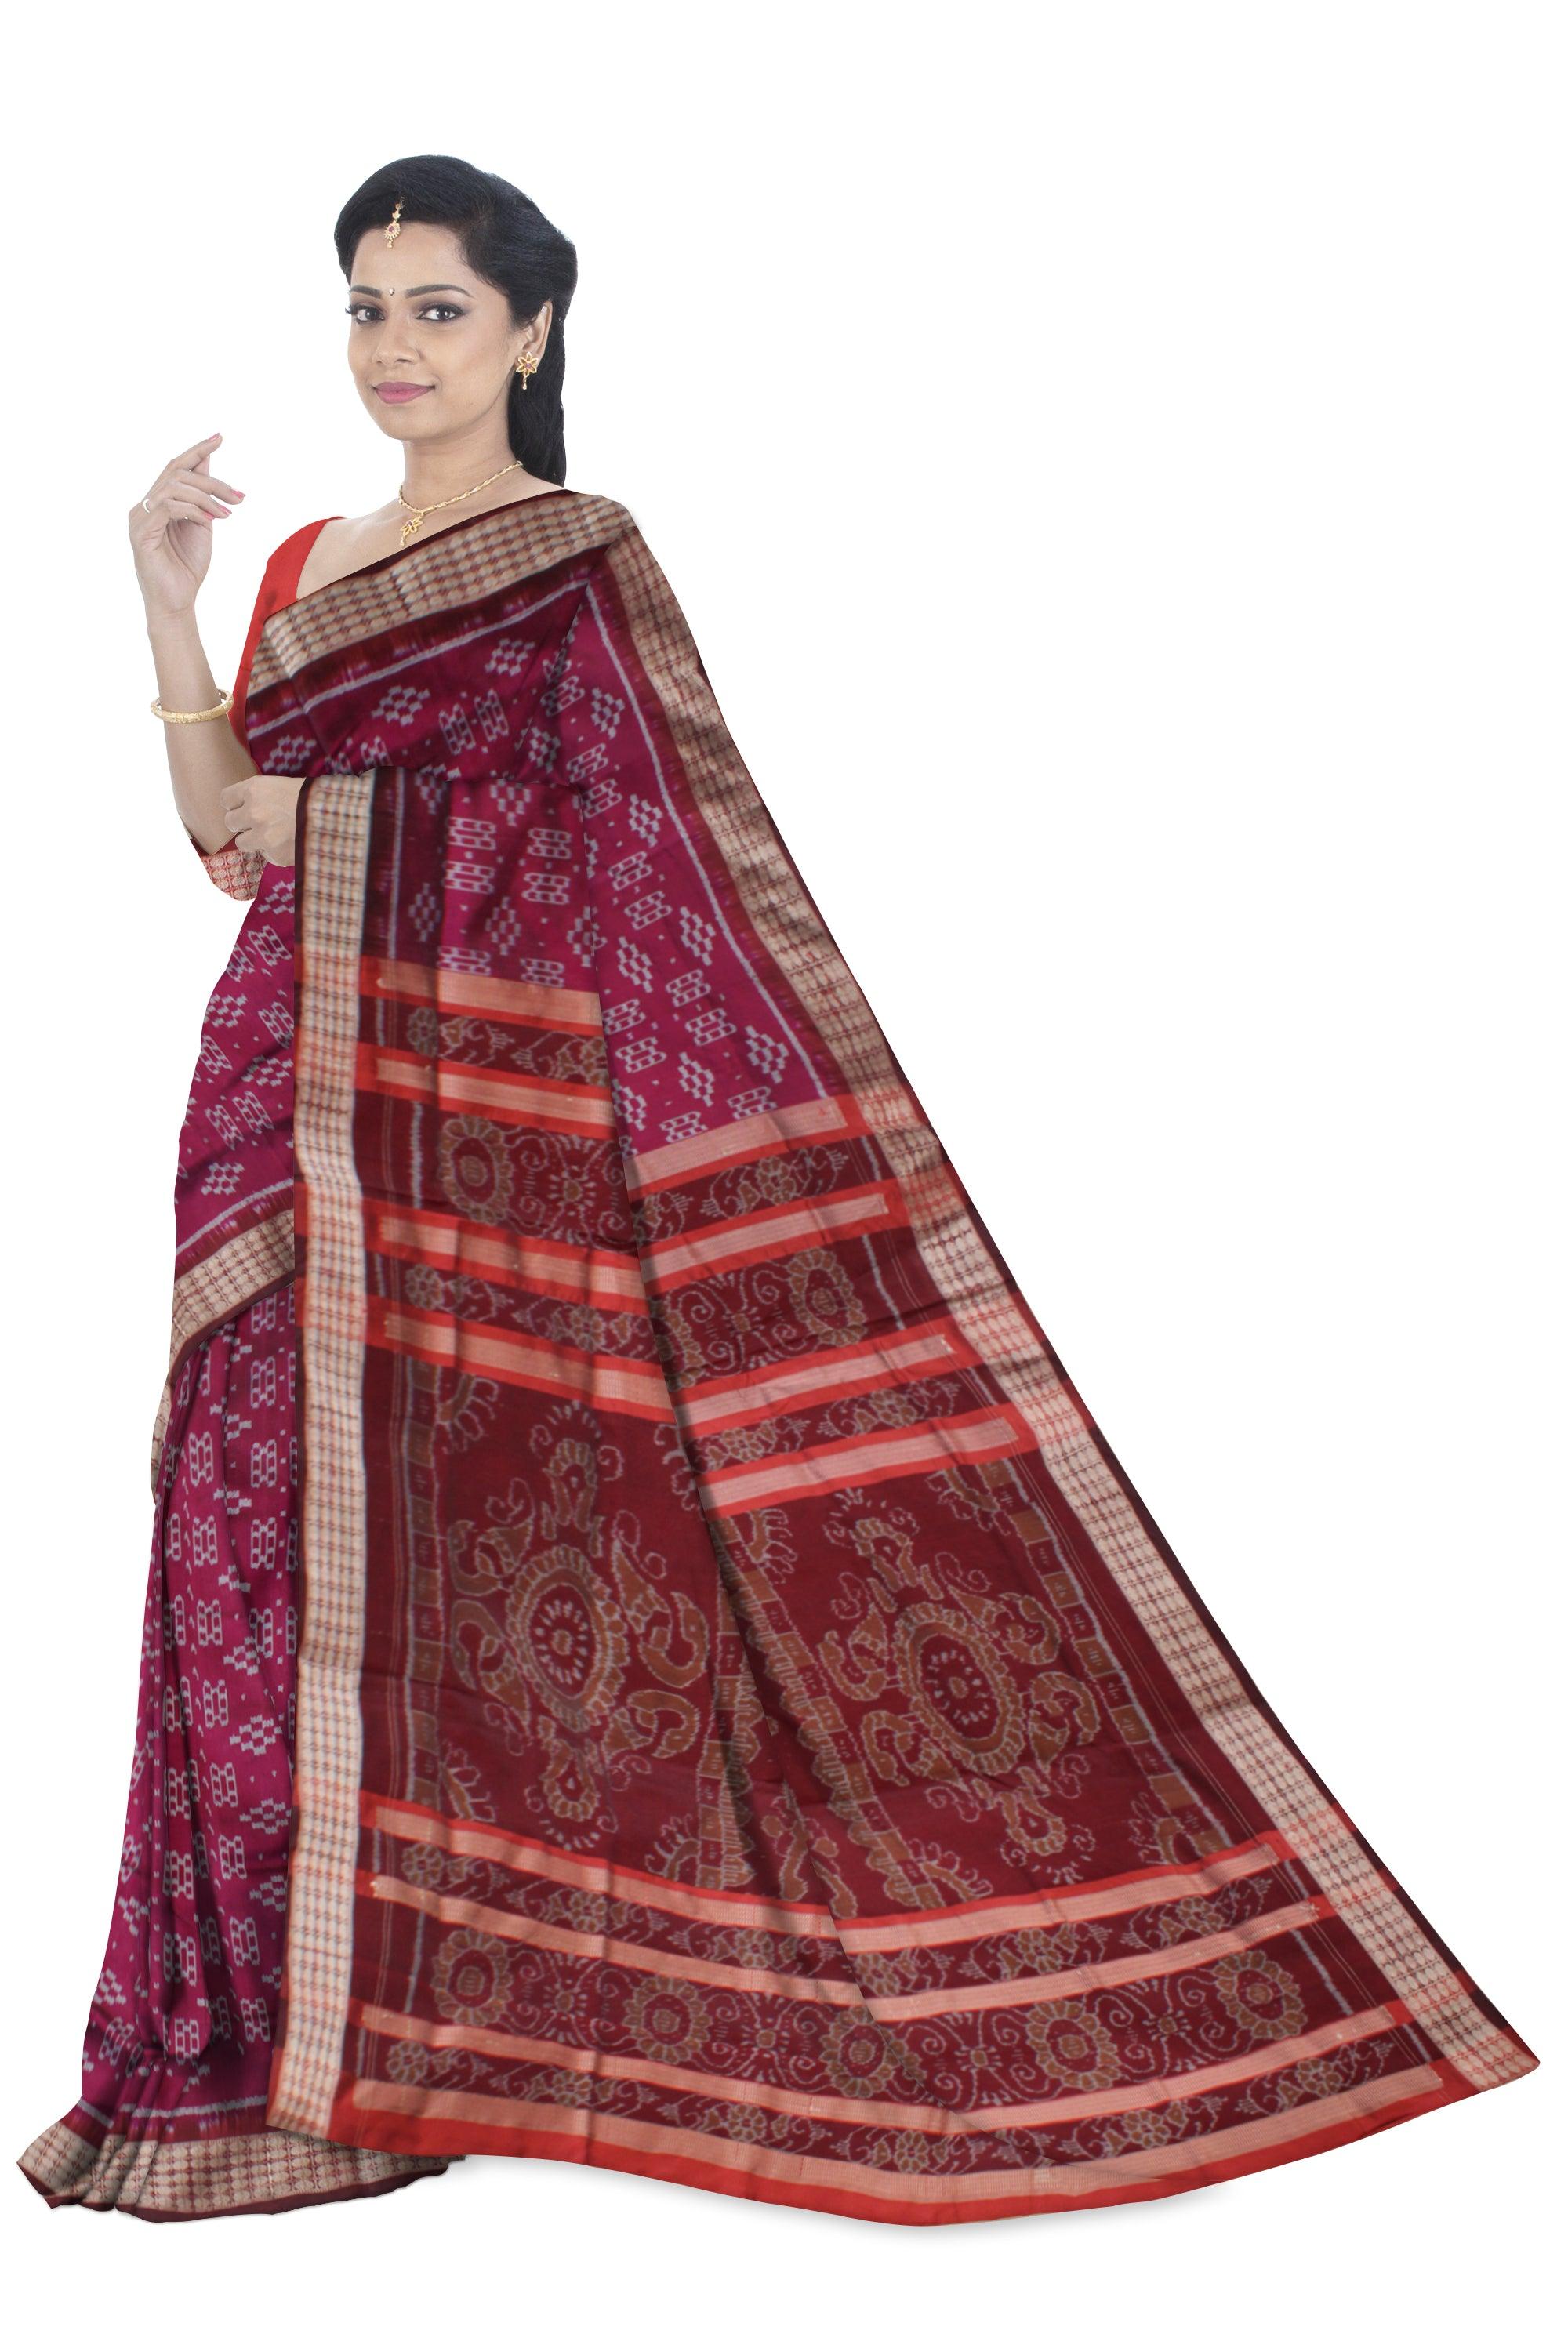 TRADITIONAL PASAPALI PATTERN PATA SAREE IS DARK-PINK AND MAROON COLOR BASE,COMES WITH MATCHING BLOUSE PIECE. - Koshali Arts & Crafts Enterprise